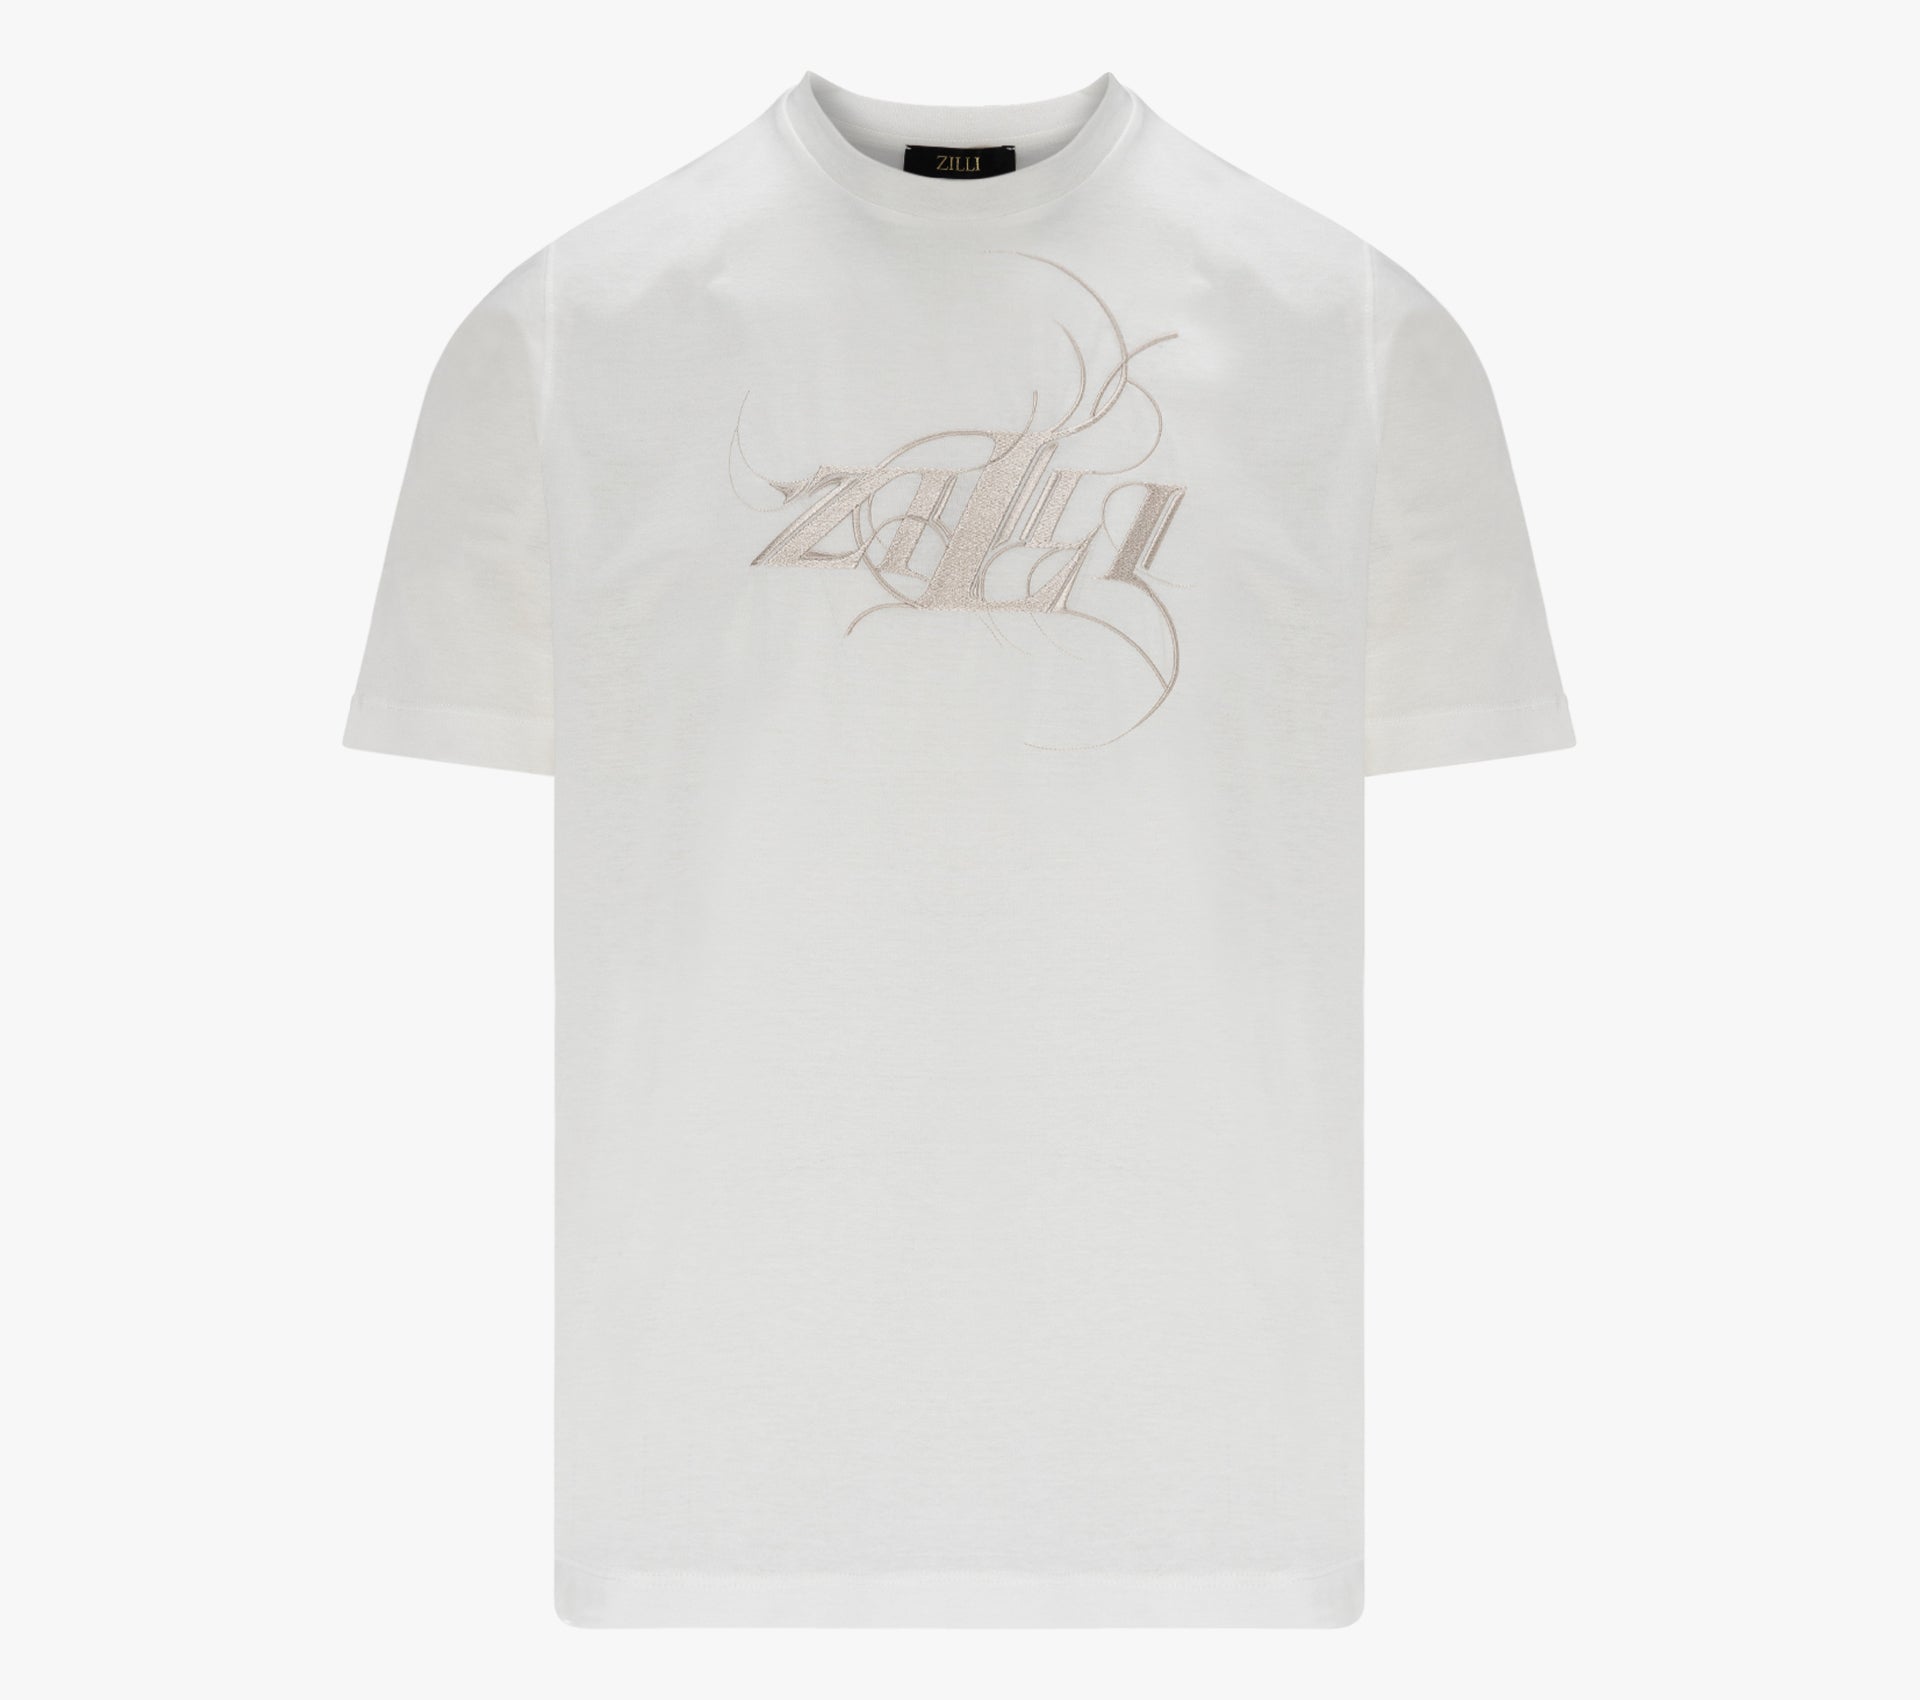 T-shirt with Stylized Zilli Lettering